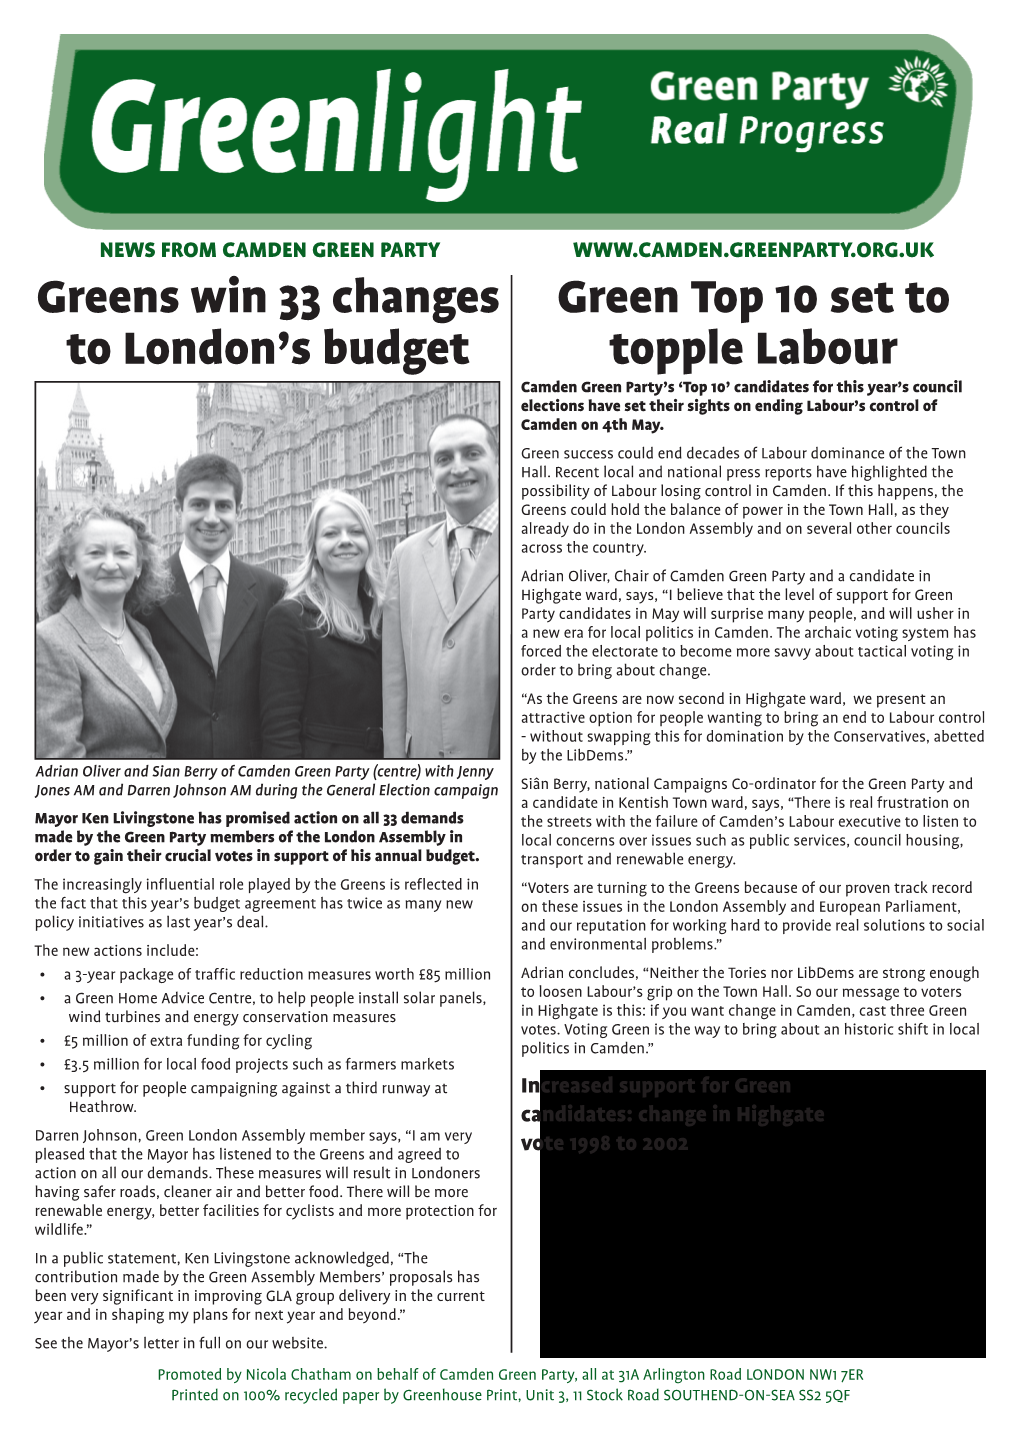 Green Top 10 Set to Topple Labour Greens Win 33 Changes to London's